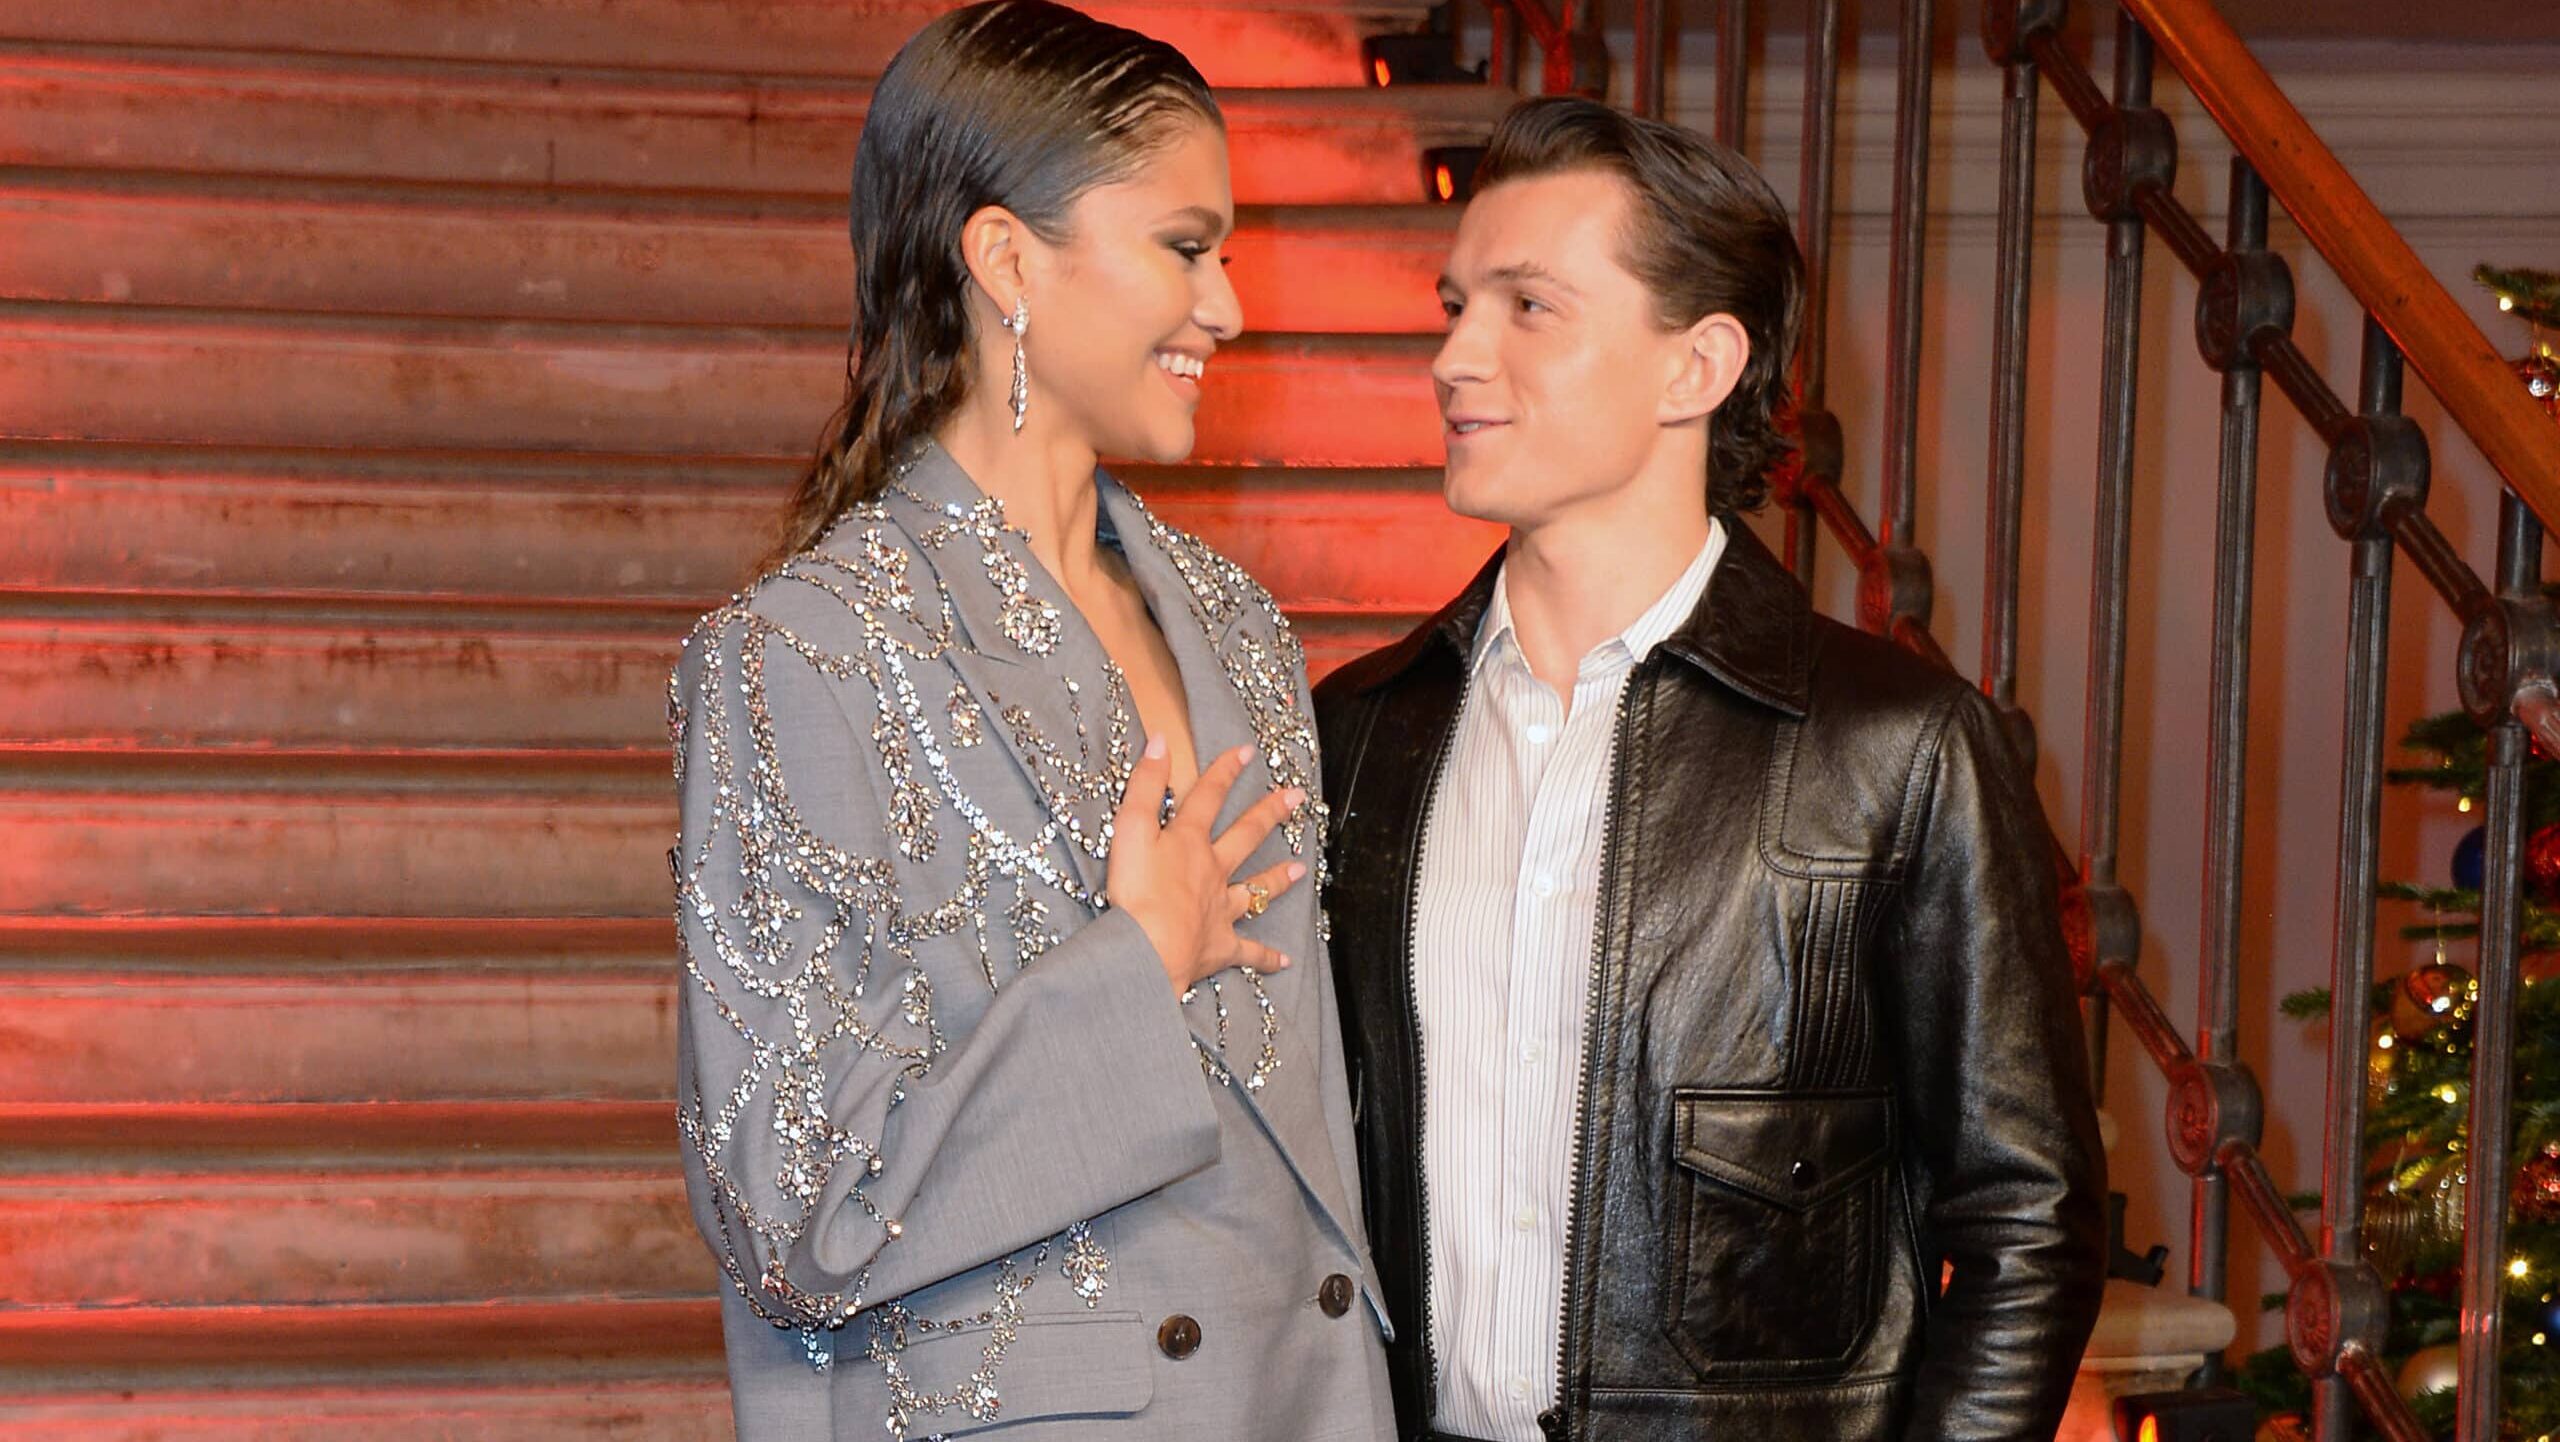 LONDON, ENGLAND - DECEMBER 05: Zendaya and Tom Holland pose at a photocall for "Spider-Man: No Way Home" at The Old Sessions House on December 5, 2021 in London, England.